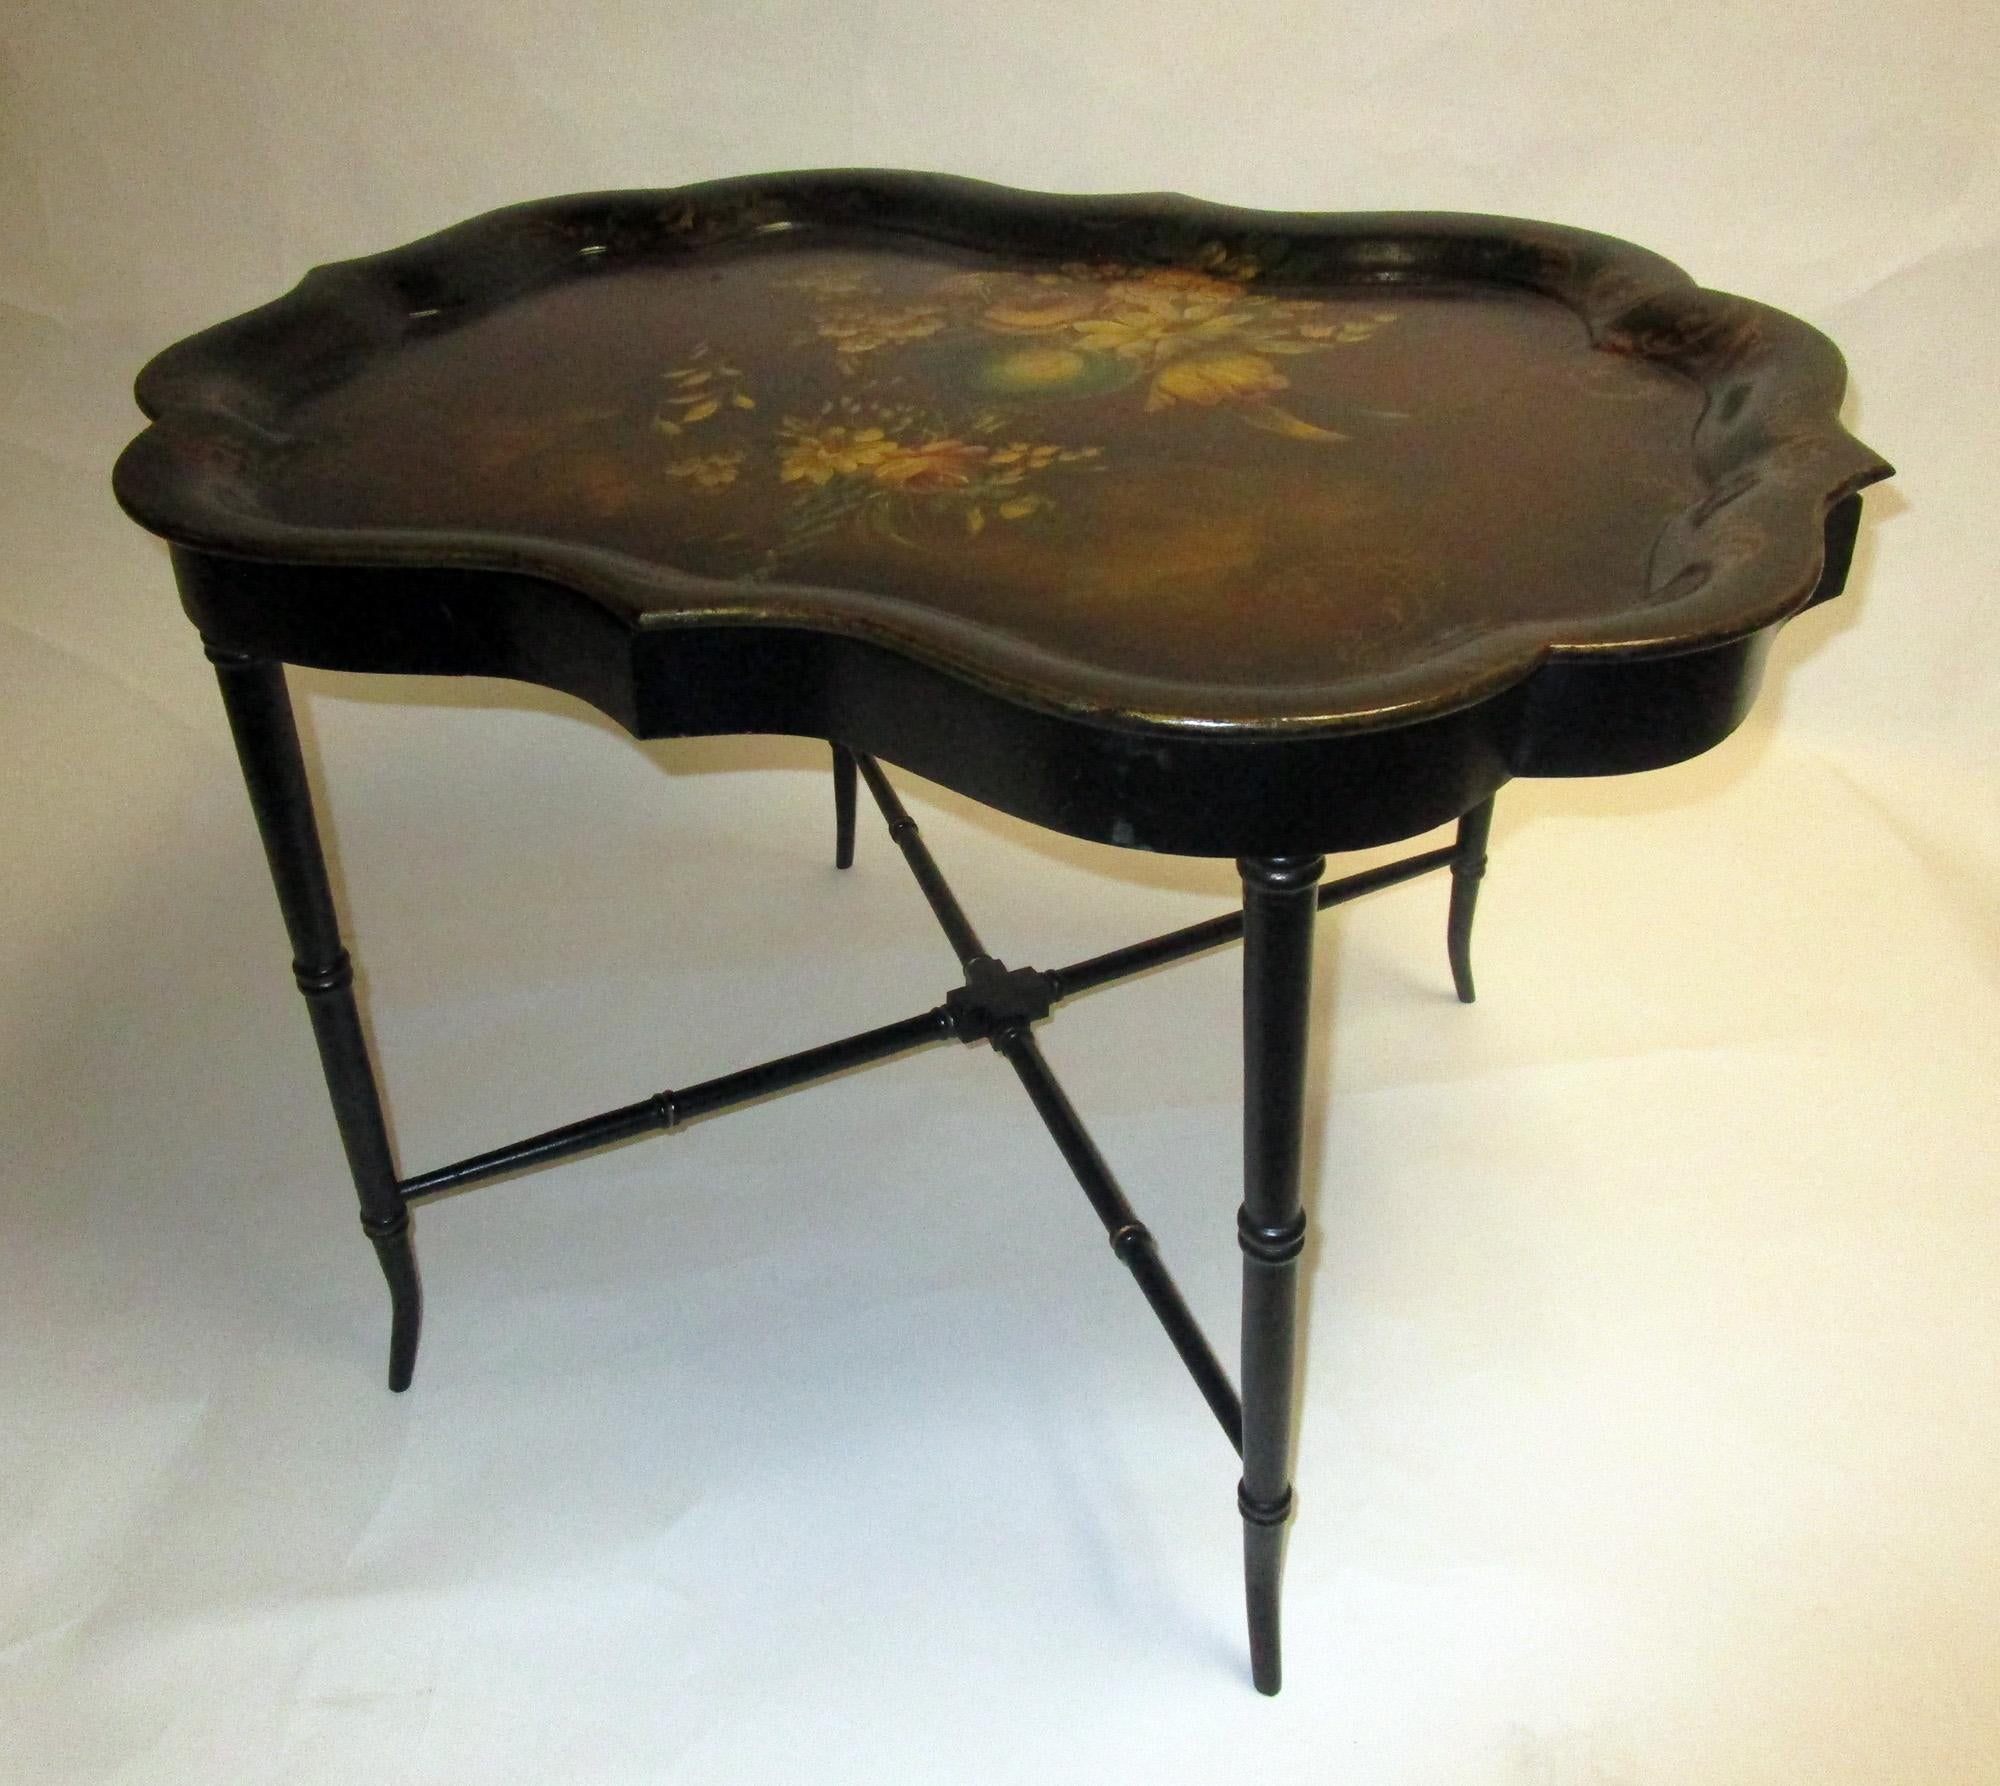 19th Century Papier Mâché Scalloped Tray Table on Faux Bamboo Base In Good Condition For Sale In Savannah, GA